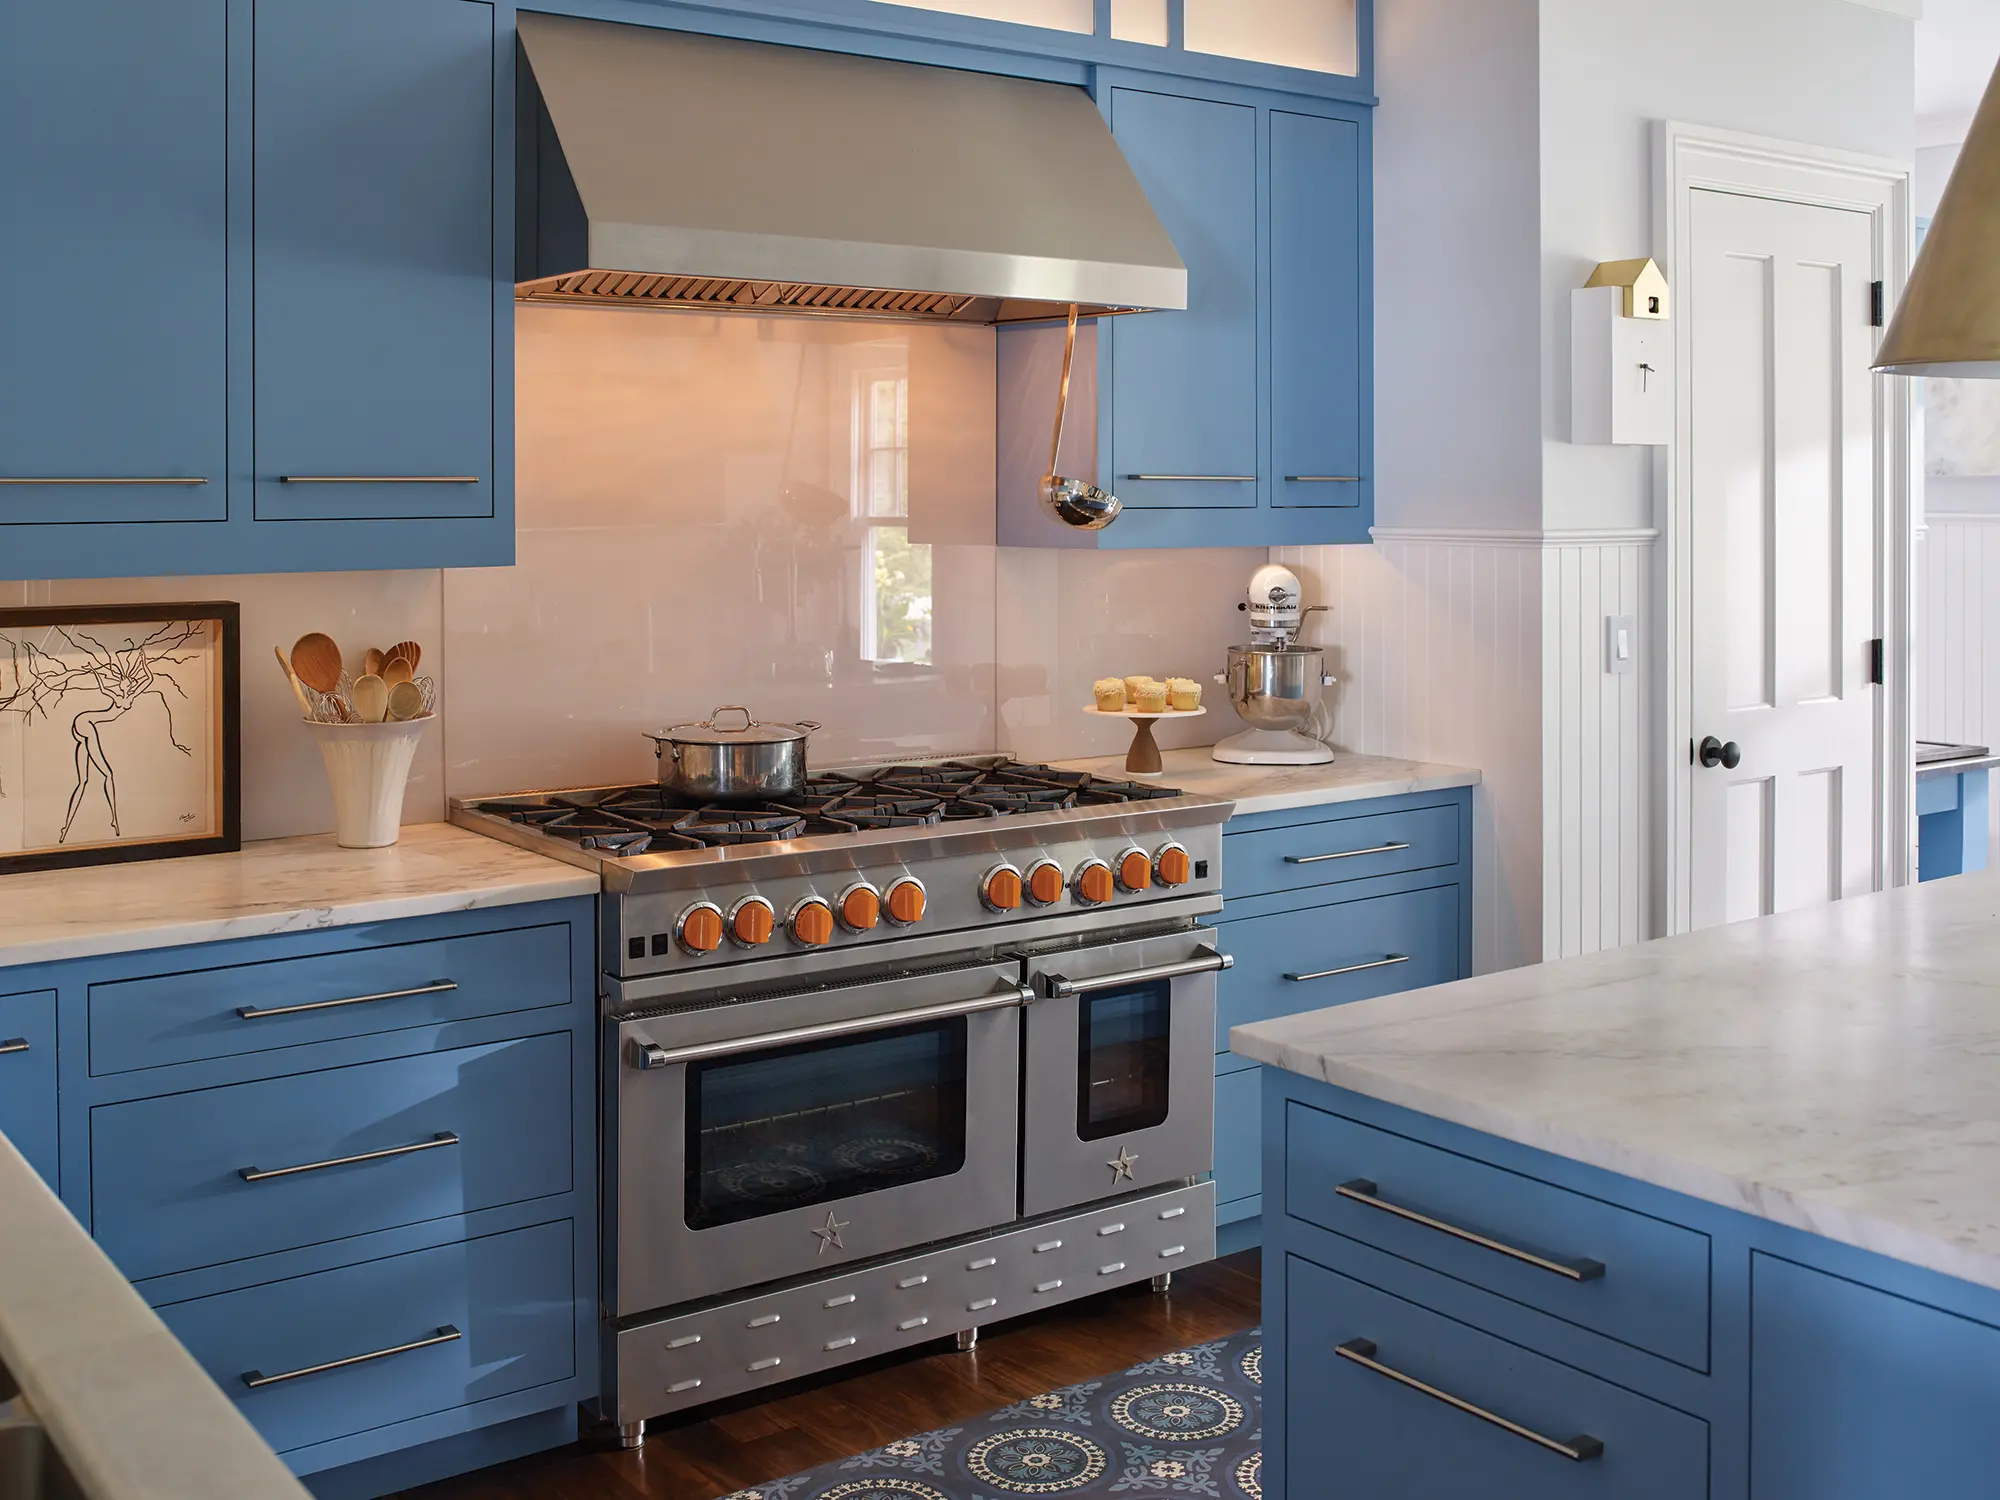 Kitchen at Summer Haven with vibrant blue custom cabinets